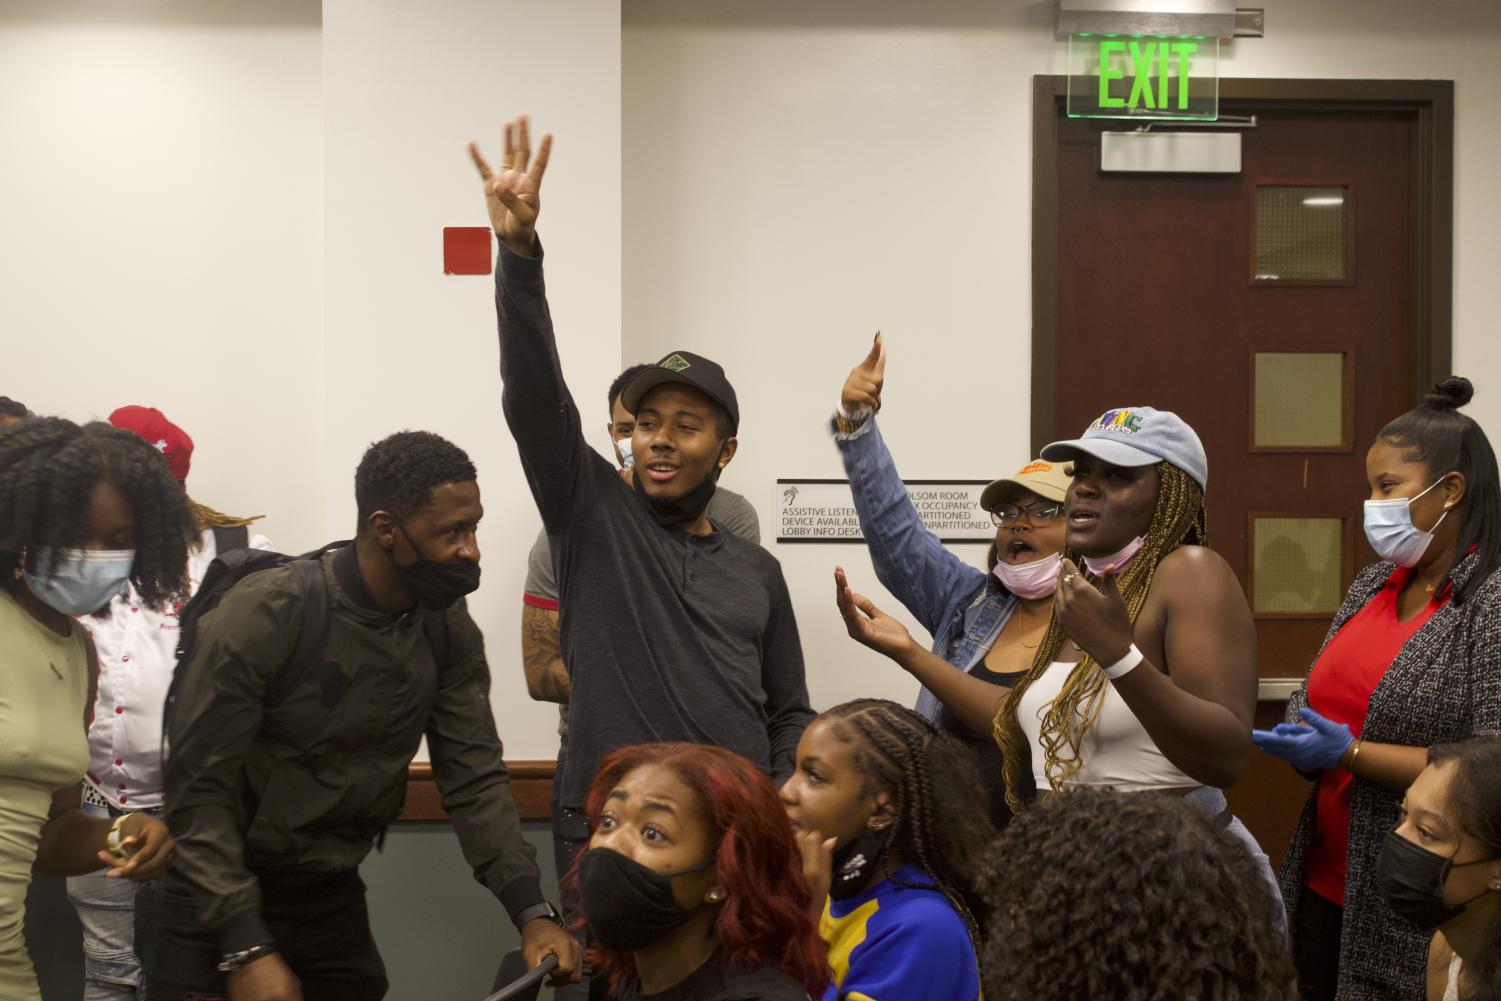 Khalil Ferguson, one the founding members of BSU and current president of the Black Alumni Chapter, and his group after participating in the singing game Encore on Thursday, Sept. 16, 2021. “Welcome Black” attendees played Encore to open the event.